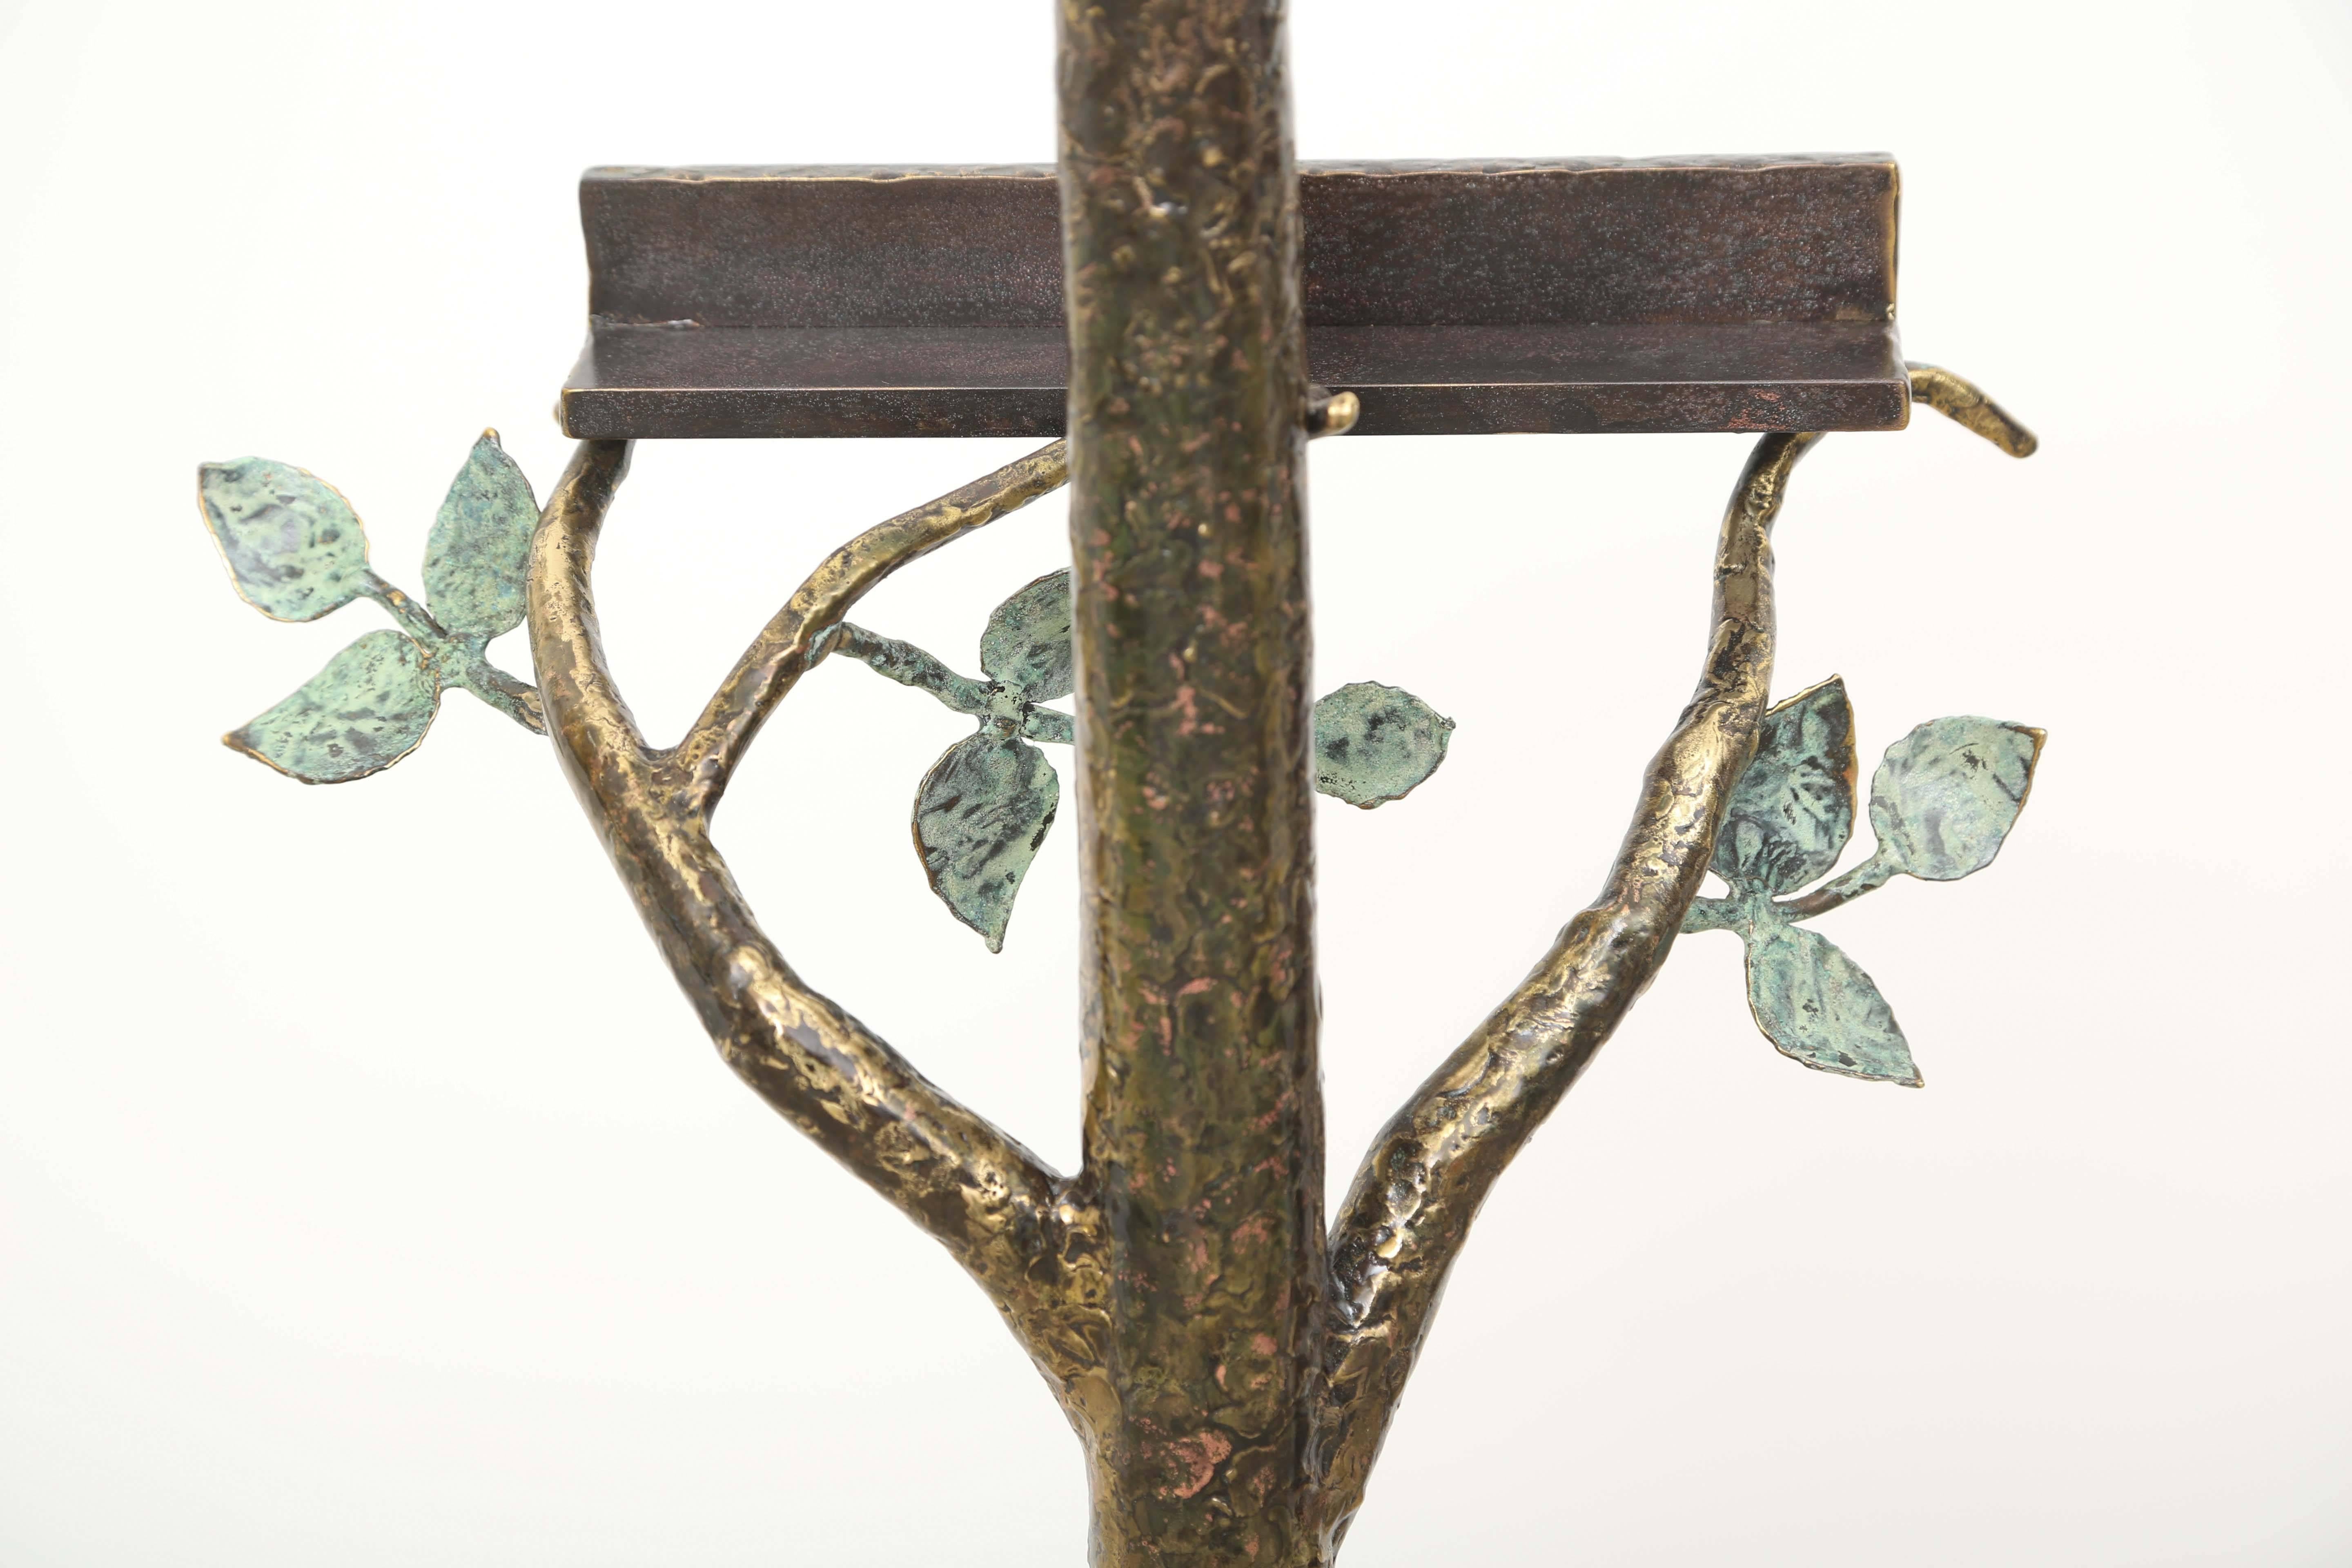 Lighted Easel Sculpture in Bronze by Daniel Chassin, Signed Piece 1